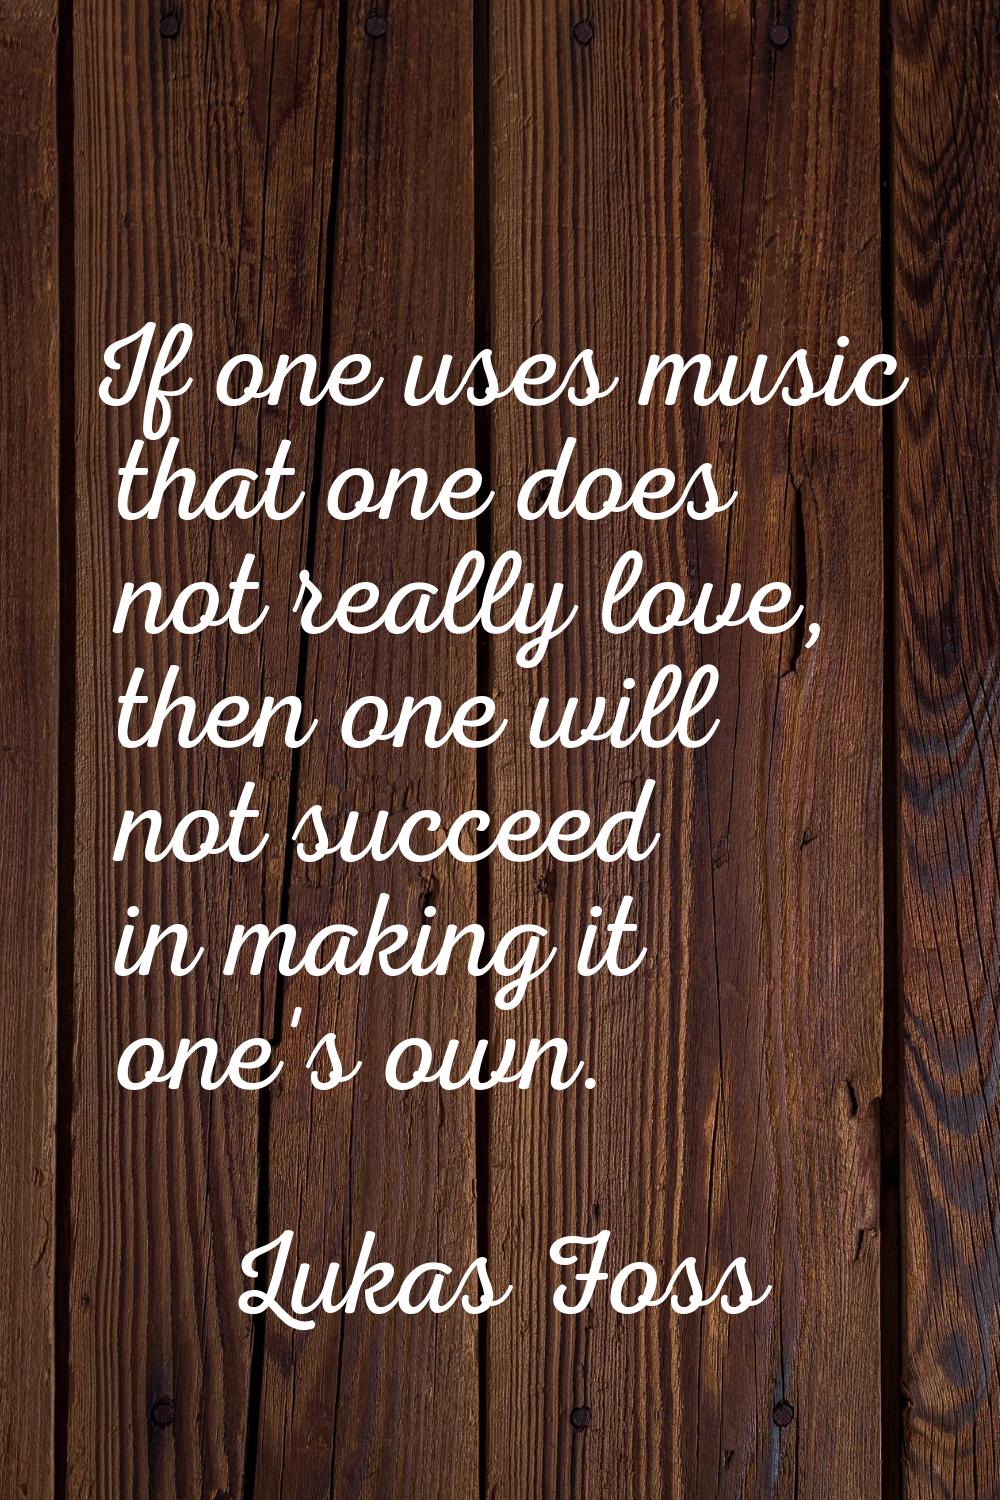 If one uses music that one does not really love, then one will not succeed in making it one's own.